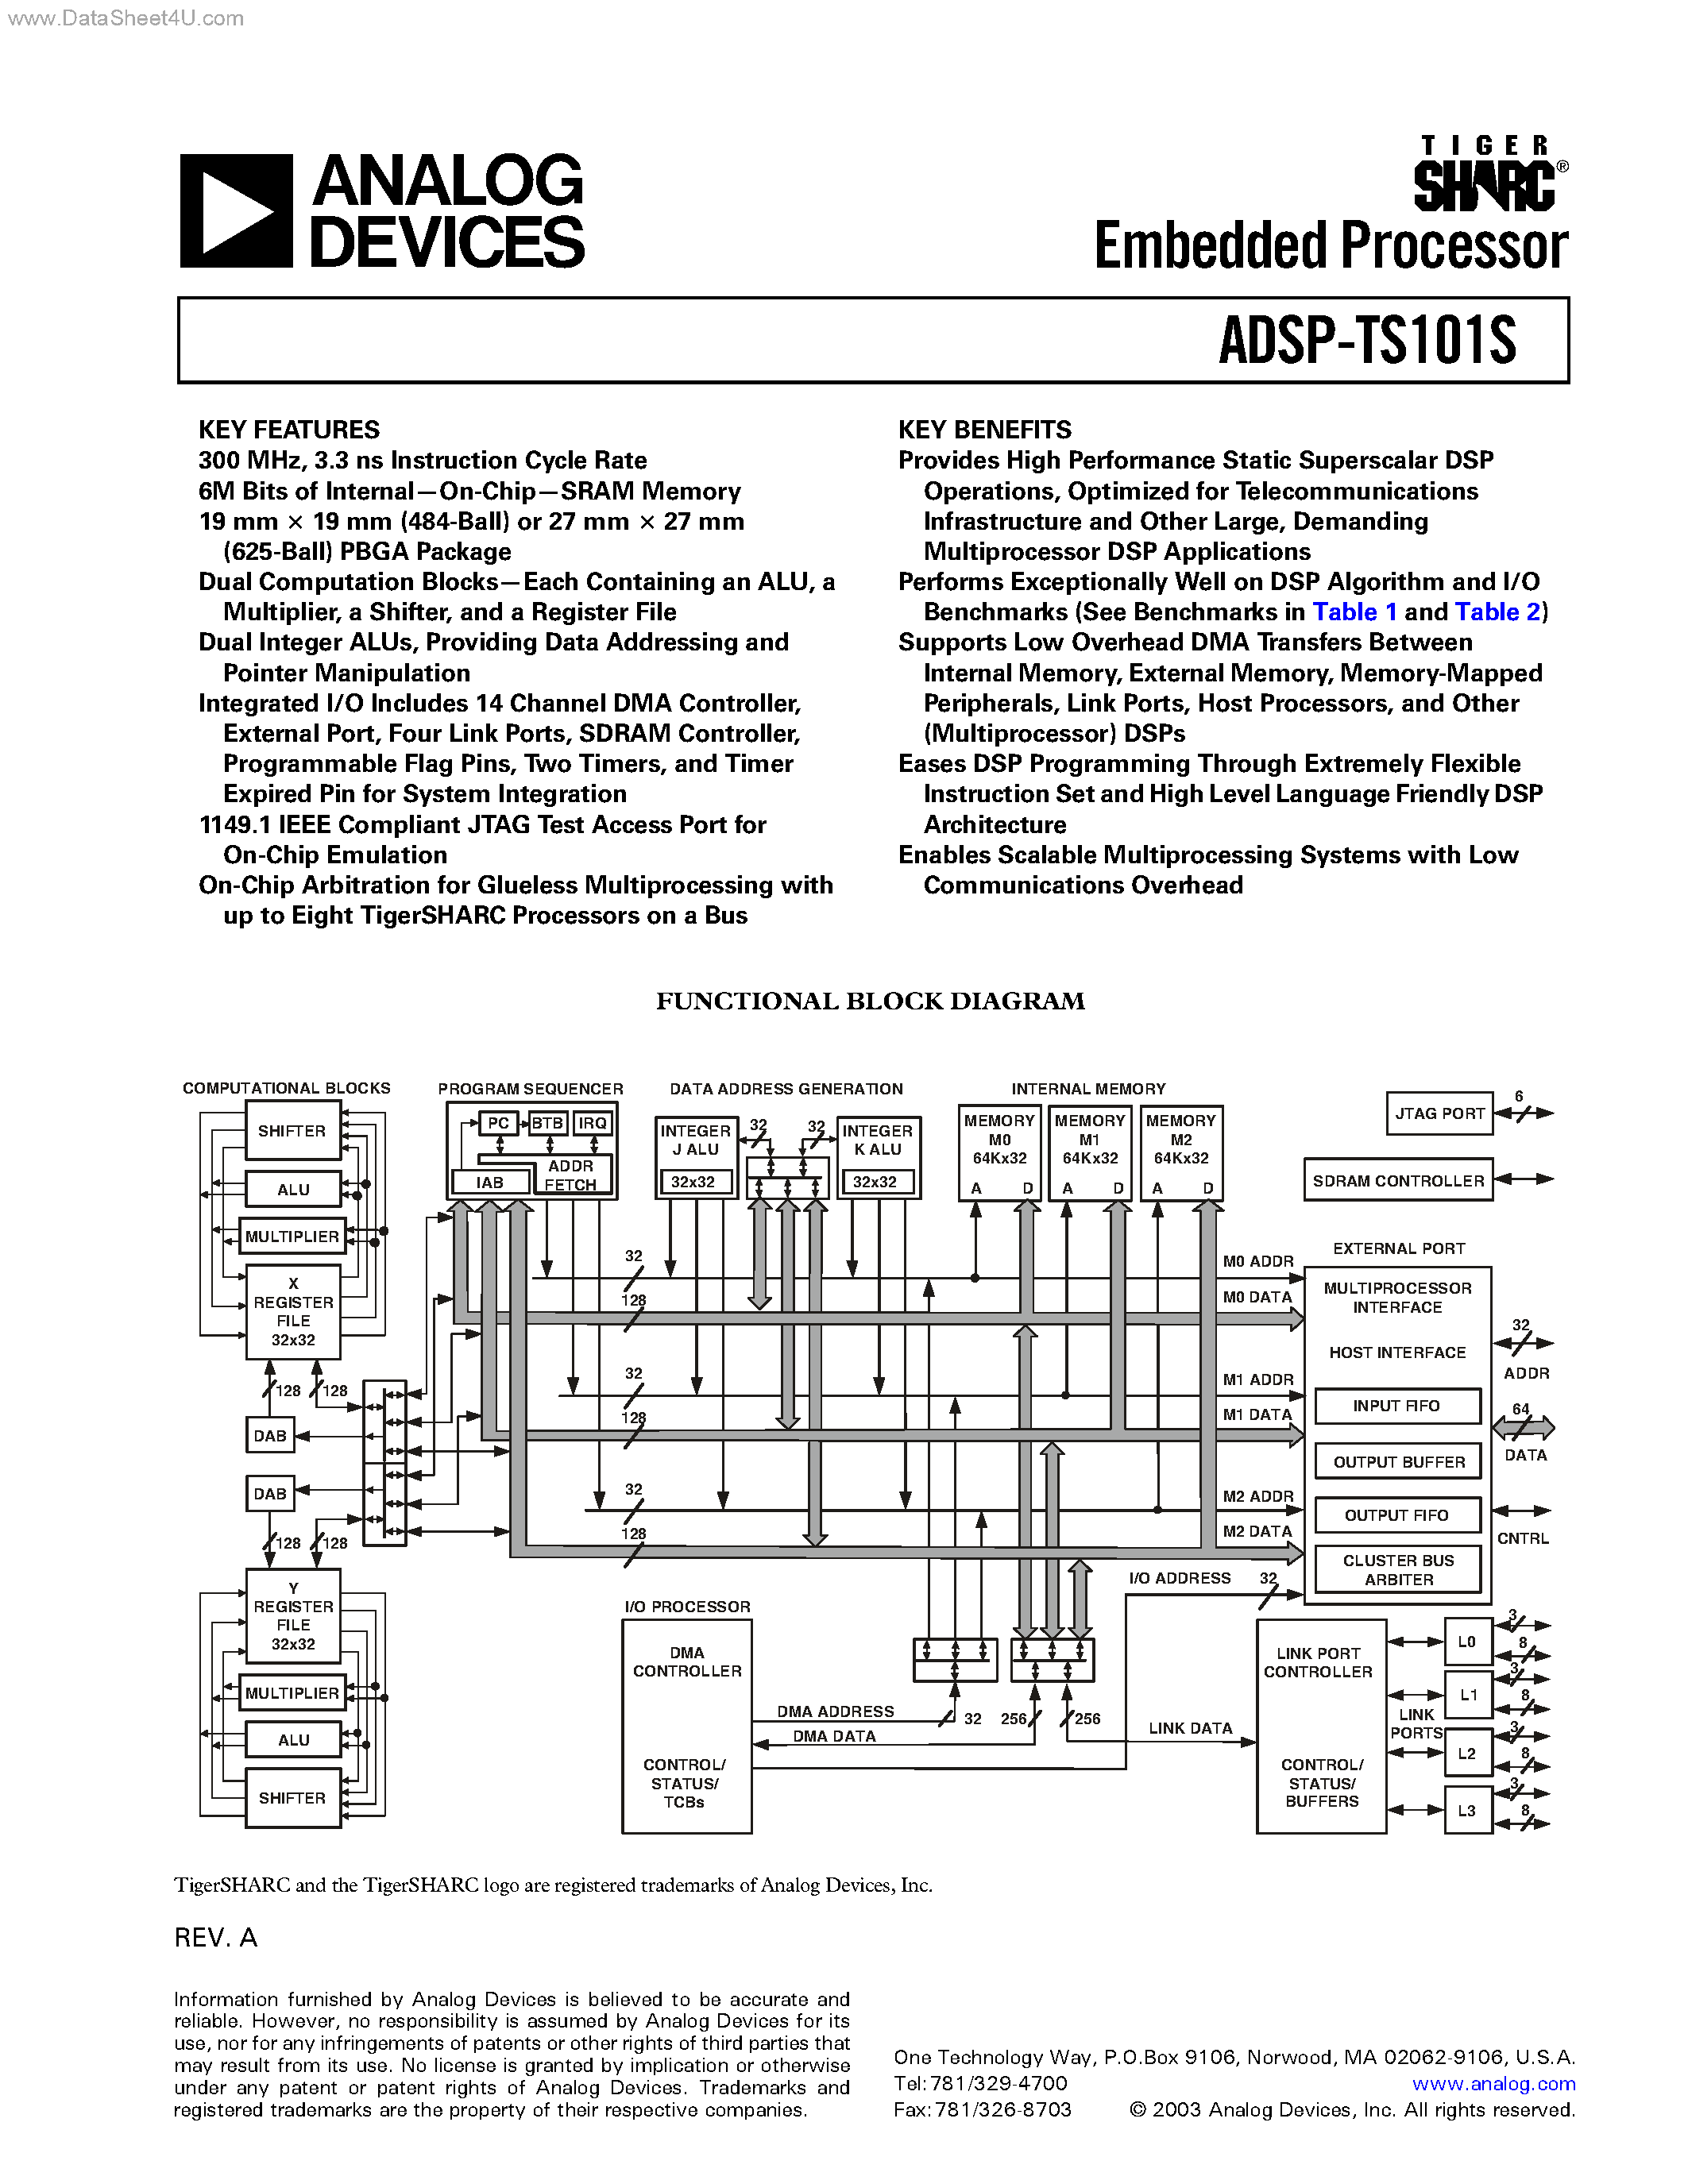 Datasheet ADSP-TS101S - Embedded Processor page 1